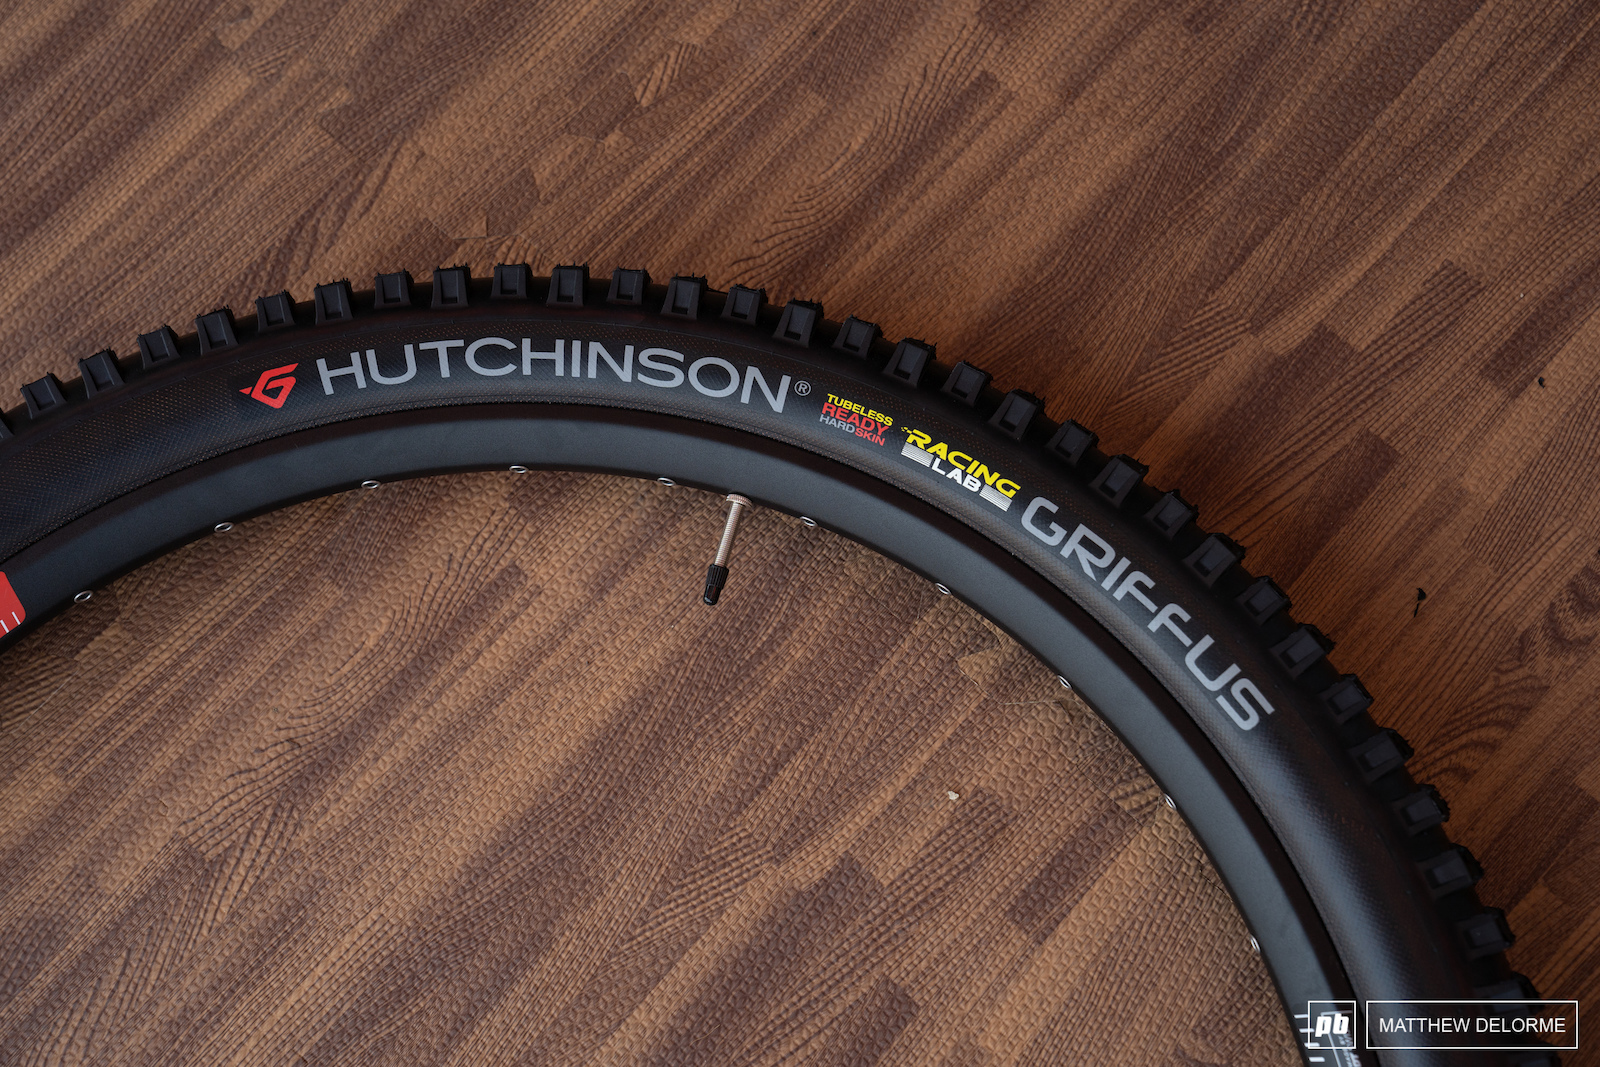 Hutchinson Griffus: Hutchinson is claimed to be the inventor of the pneumatic cycling tire. The Griffus is their enduro racing tire and it has done well in EWS competition. Available for 27.5” and 29” wheels in 2.4” and 2.5” widths, with the 2.5” option receiving a taller, more aggressive tread pattern. Hutchinson suggests running the 2.5” version up front, and the 2.4” in the back.